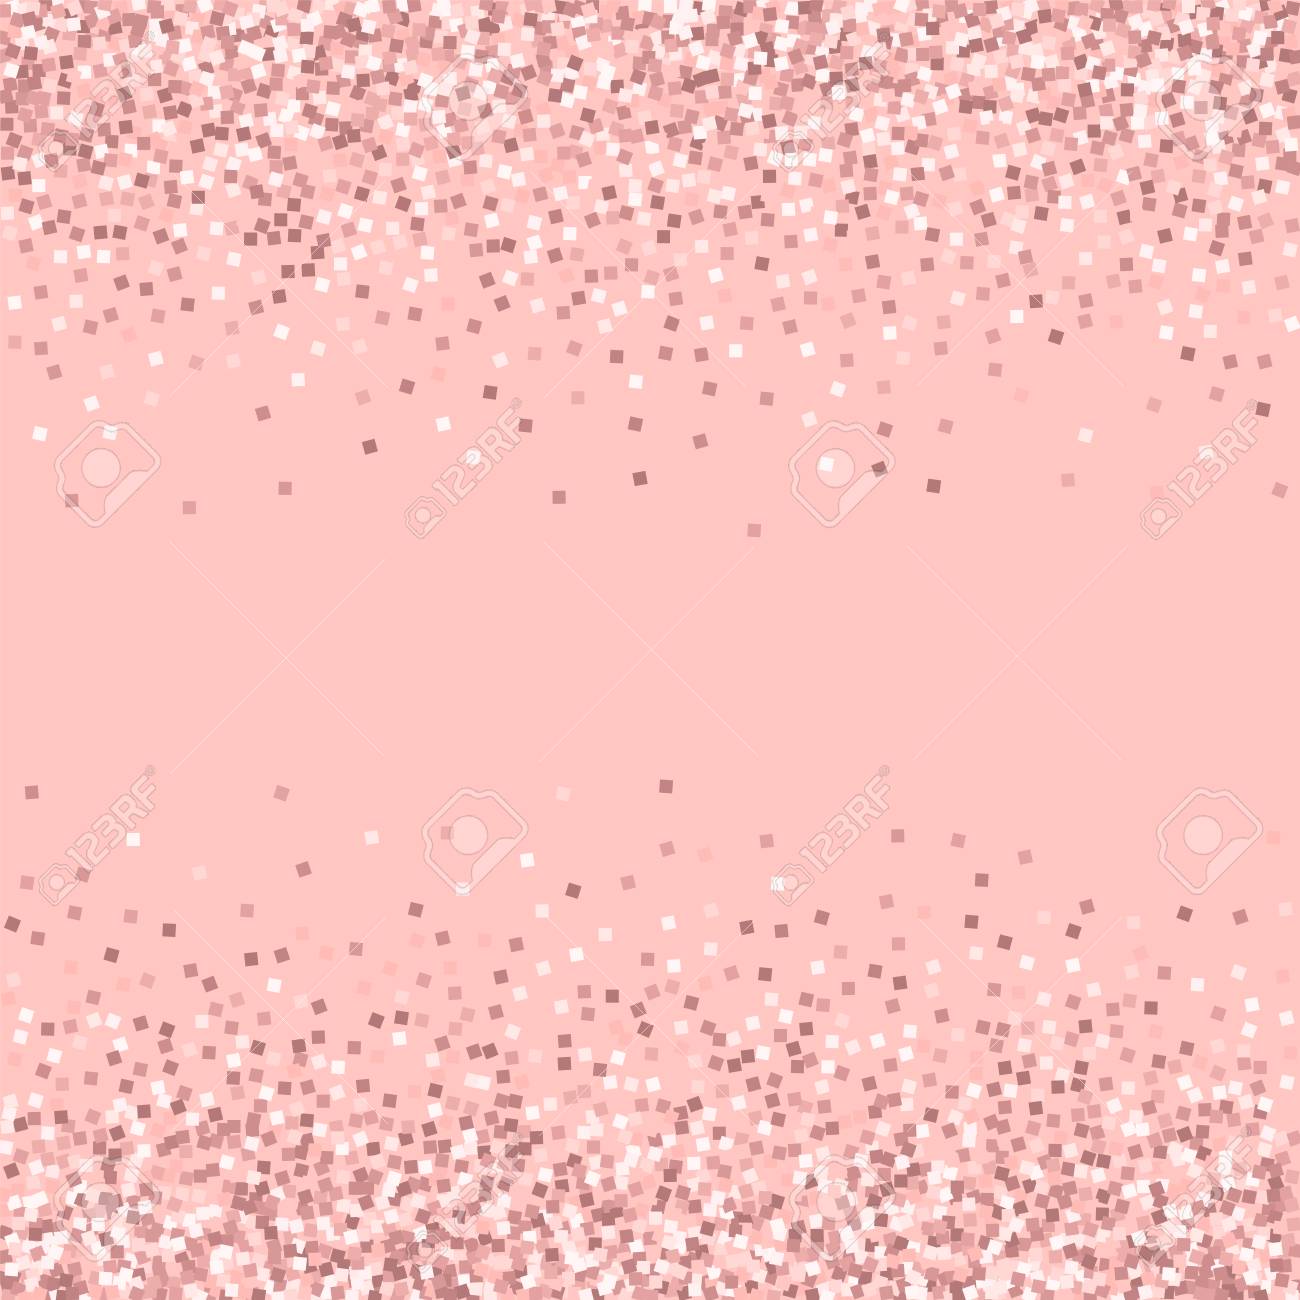 Pink Gold Glitter Scattered Border With On